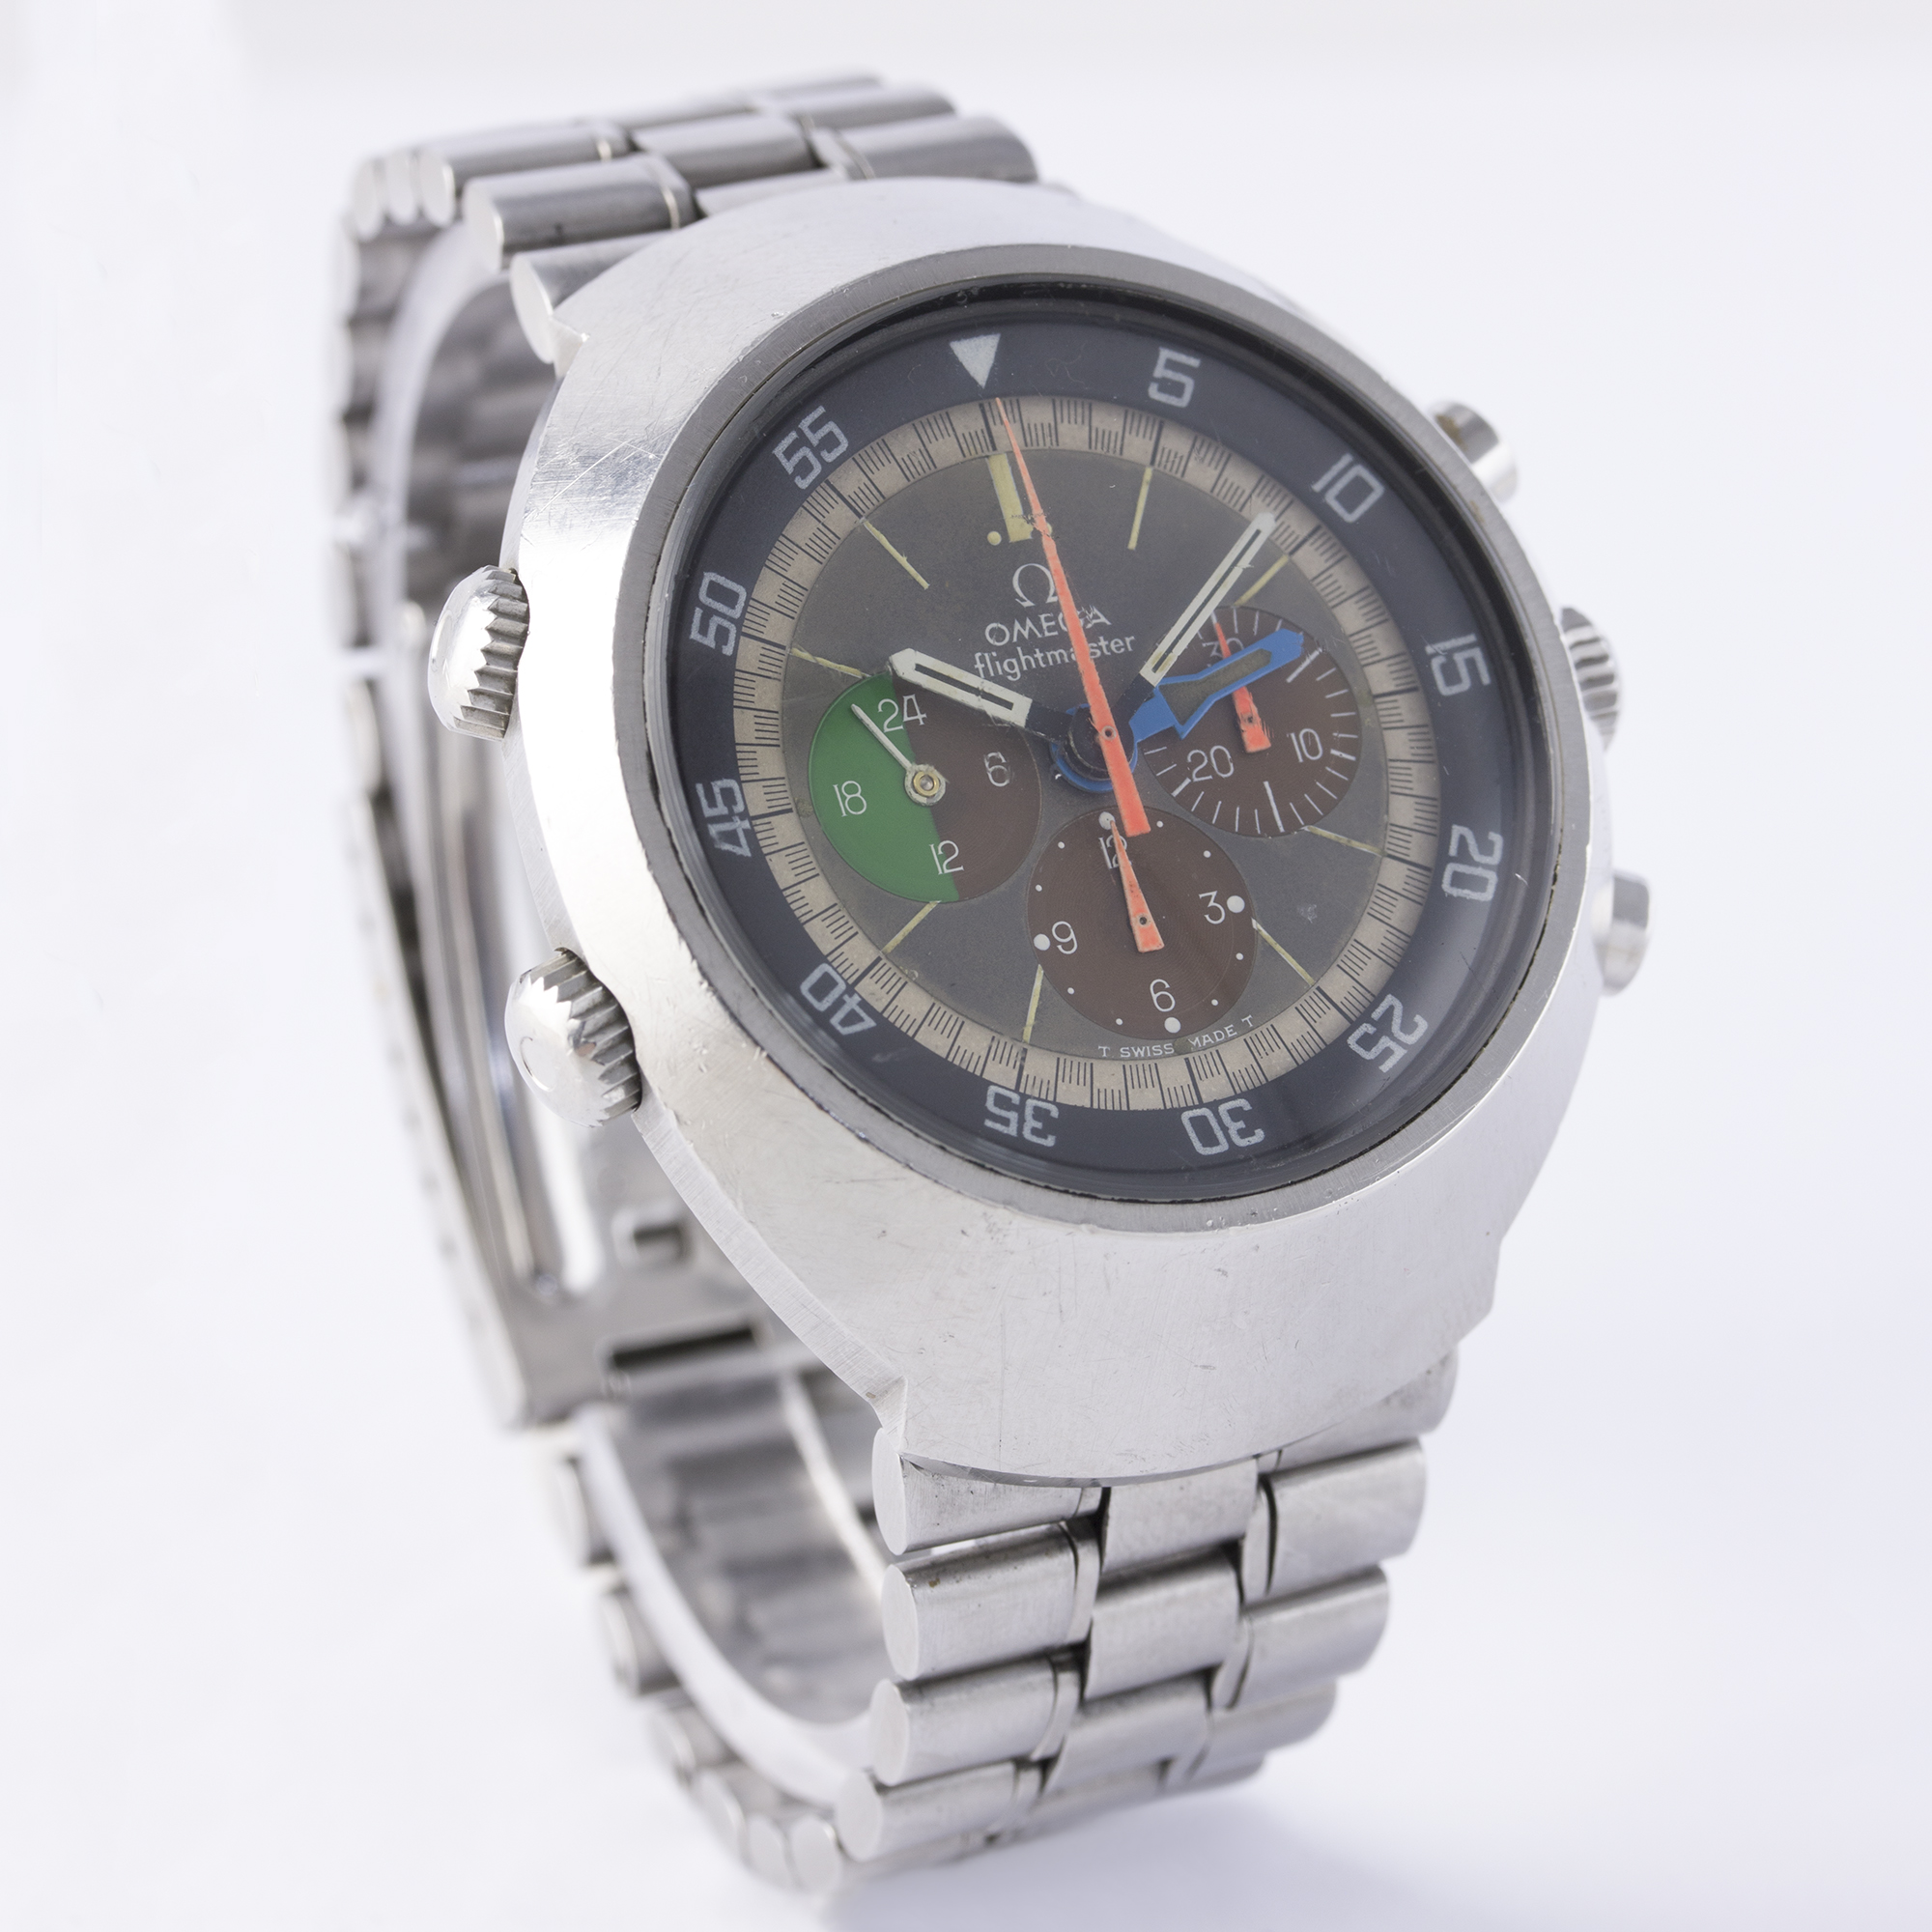 A RARE GENTLEMAN’S STAINLESS STEEL OMEGA FLIGHTMASTER CHRONOGRAPH BRACELET WATCH CIRCA 1970, REF. - Image 5 of 9